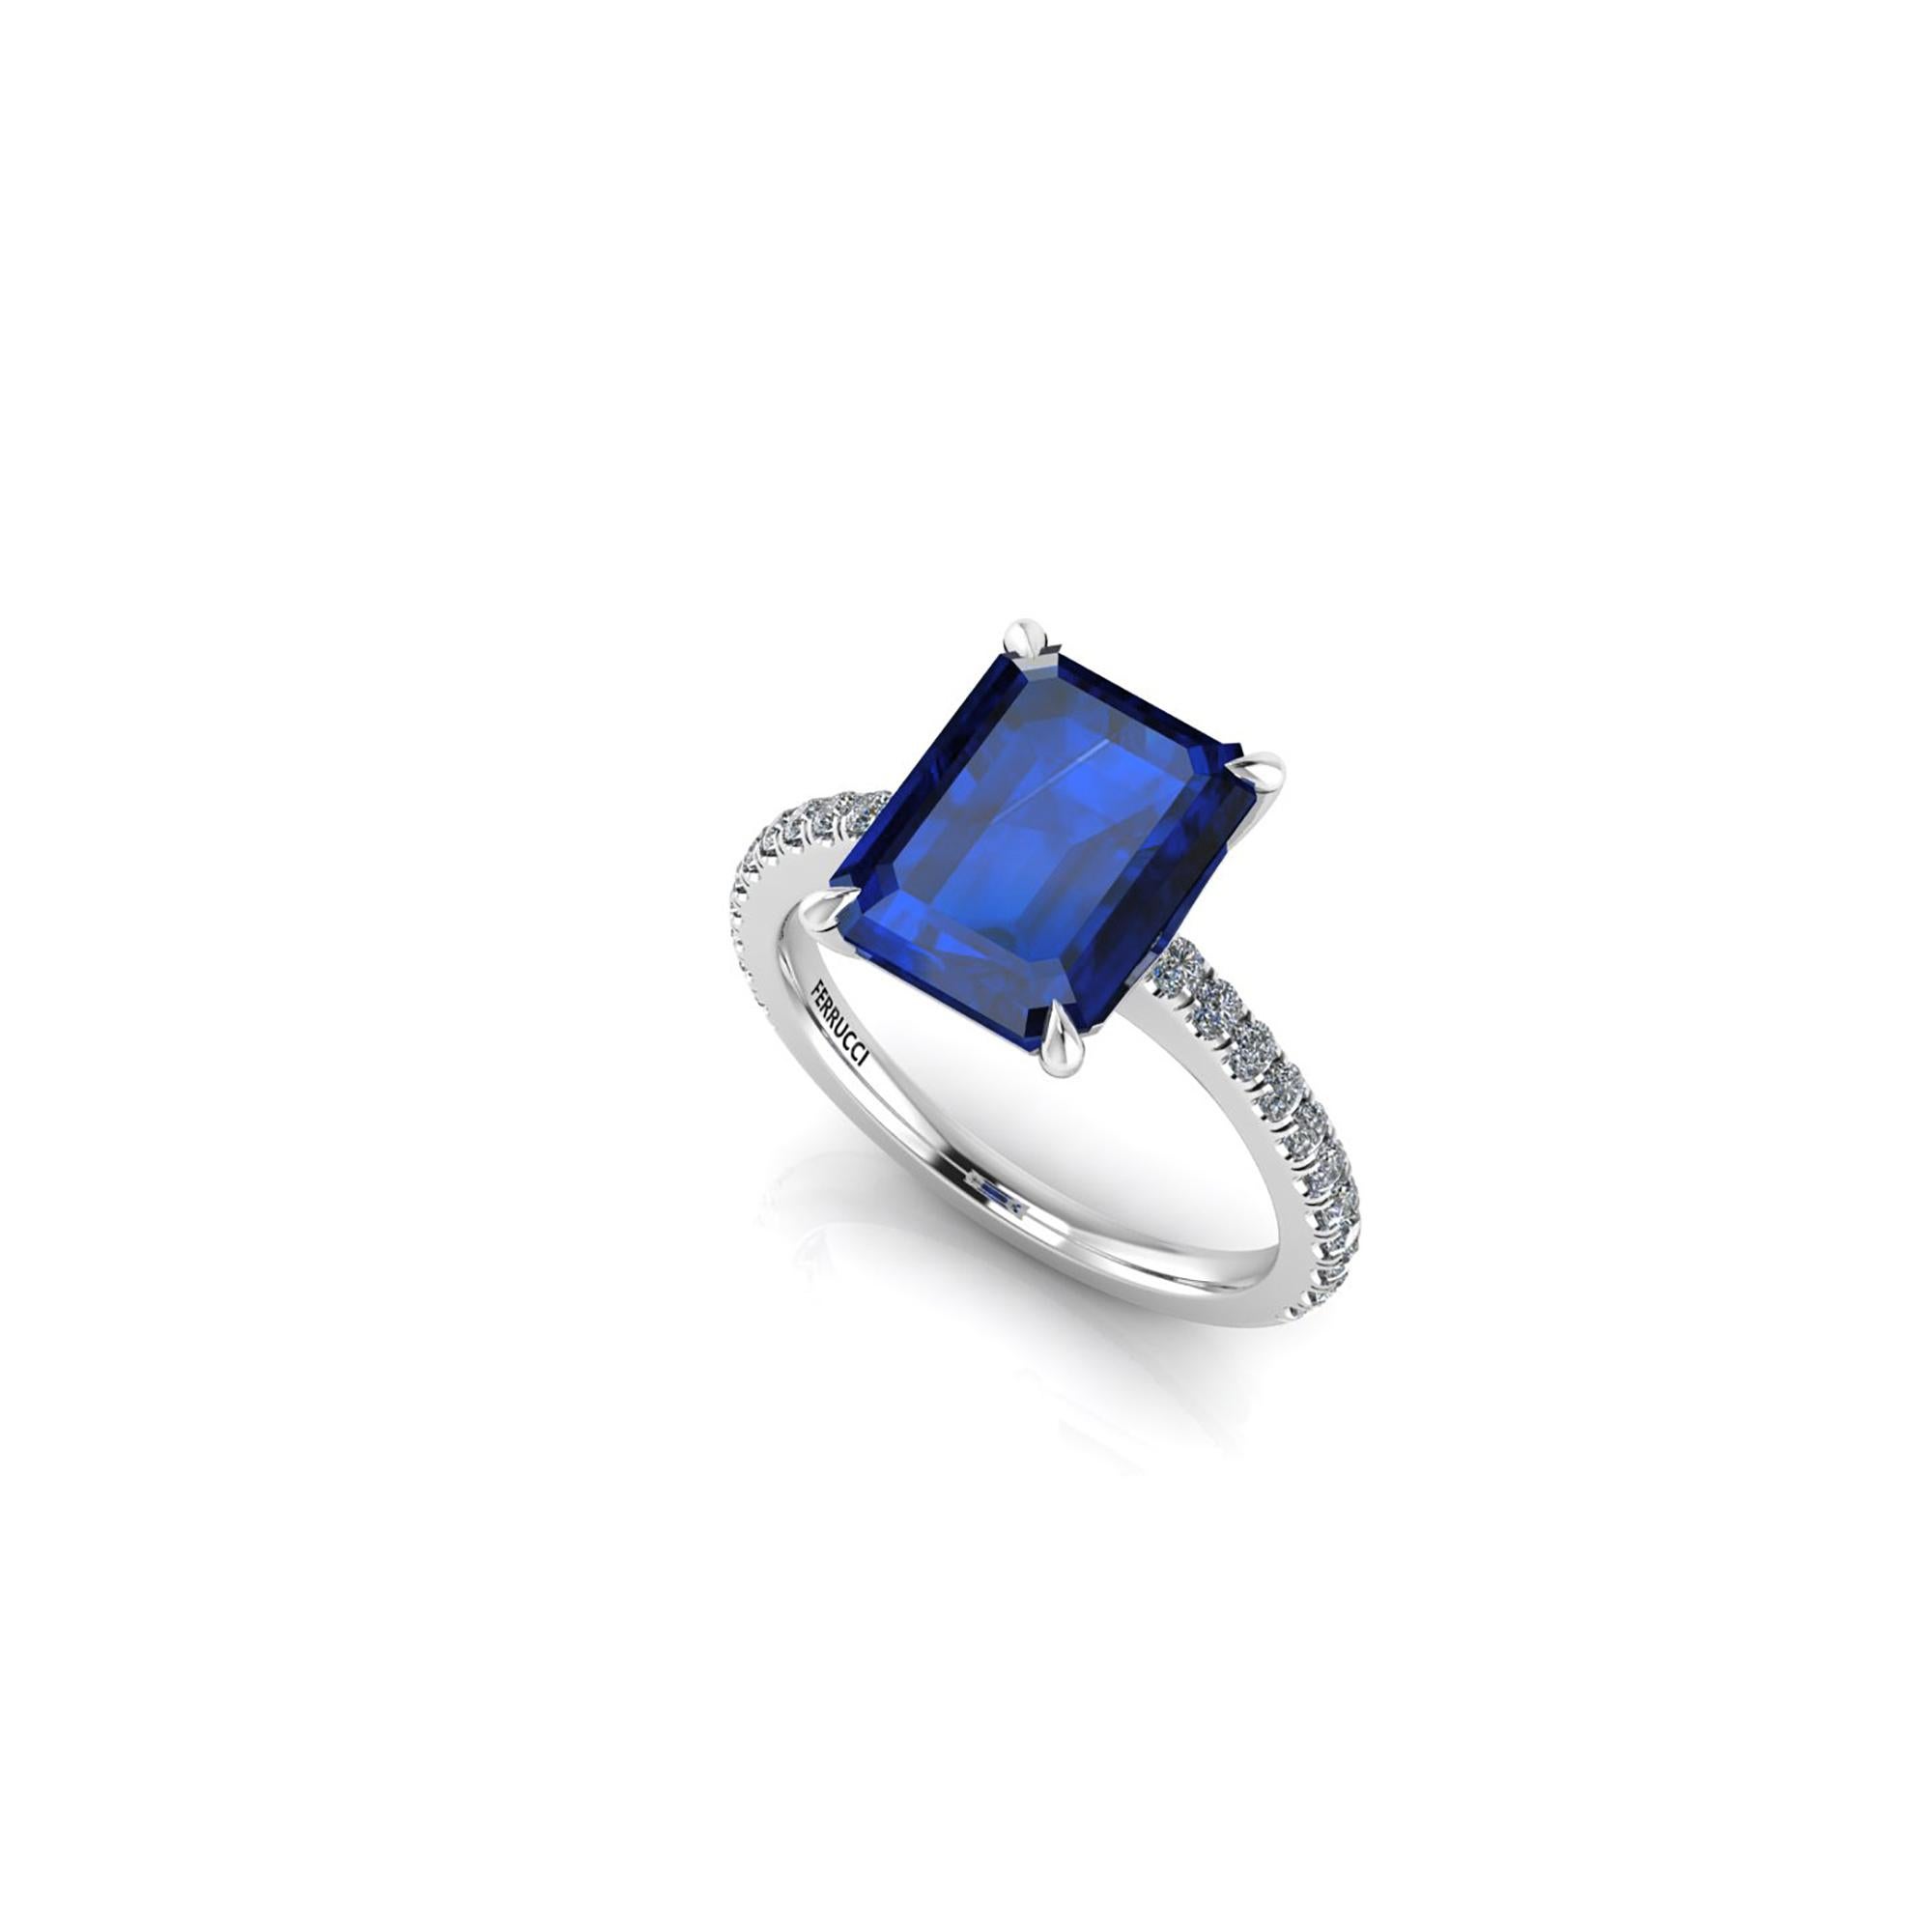 GIA Certified 4.53 carat Sri Lanka emerald cut Sapphire, very high quality color,  embellished by a pave' of bright diamonds of approximately  total carat weight of 0.32 carat, set in a hand crafted Platinum 950 ring, manufactured with the best